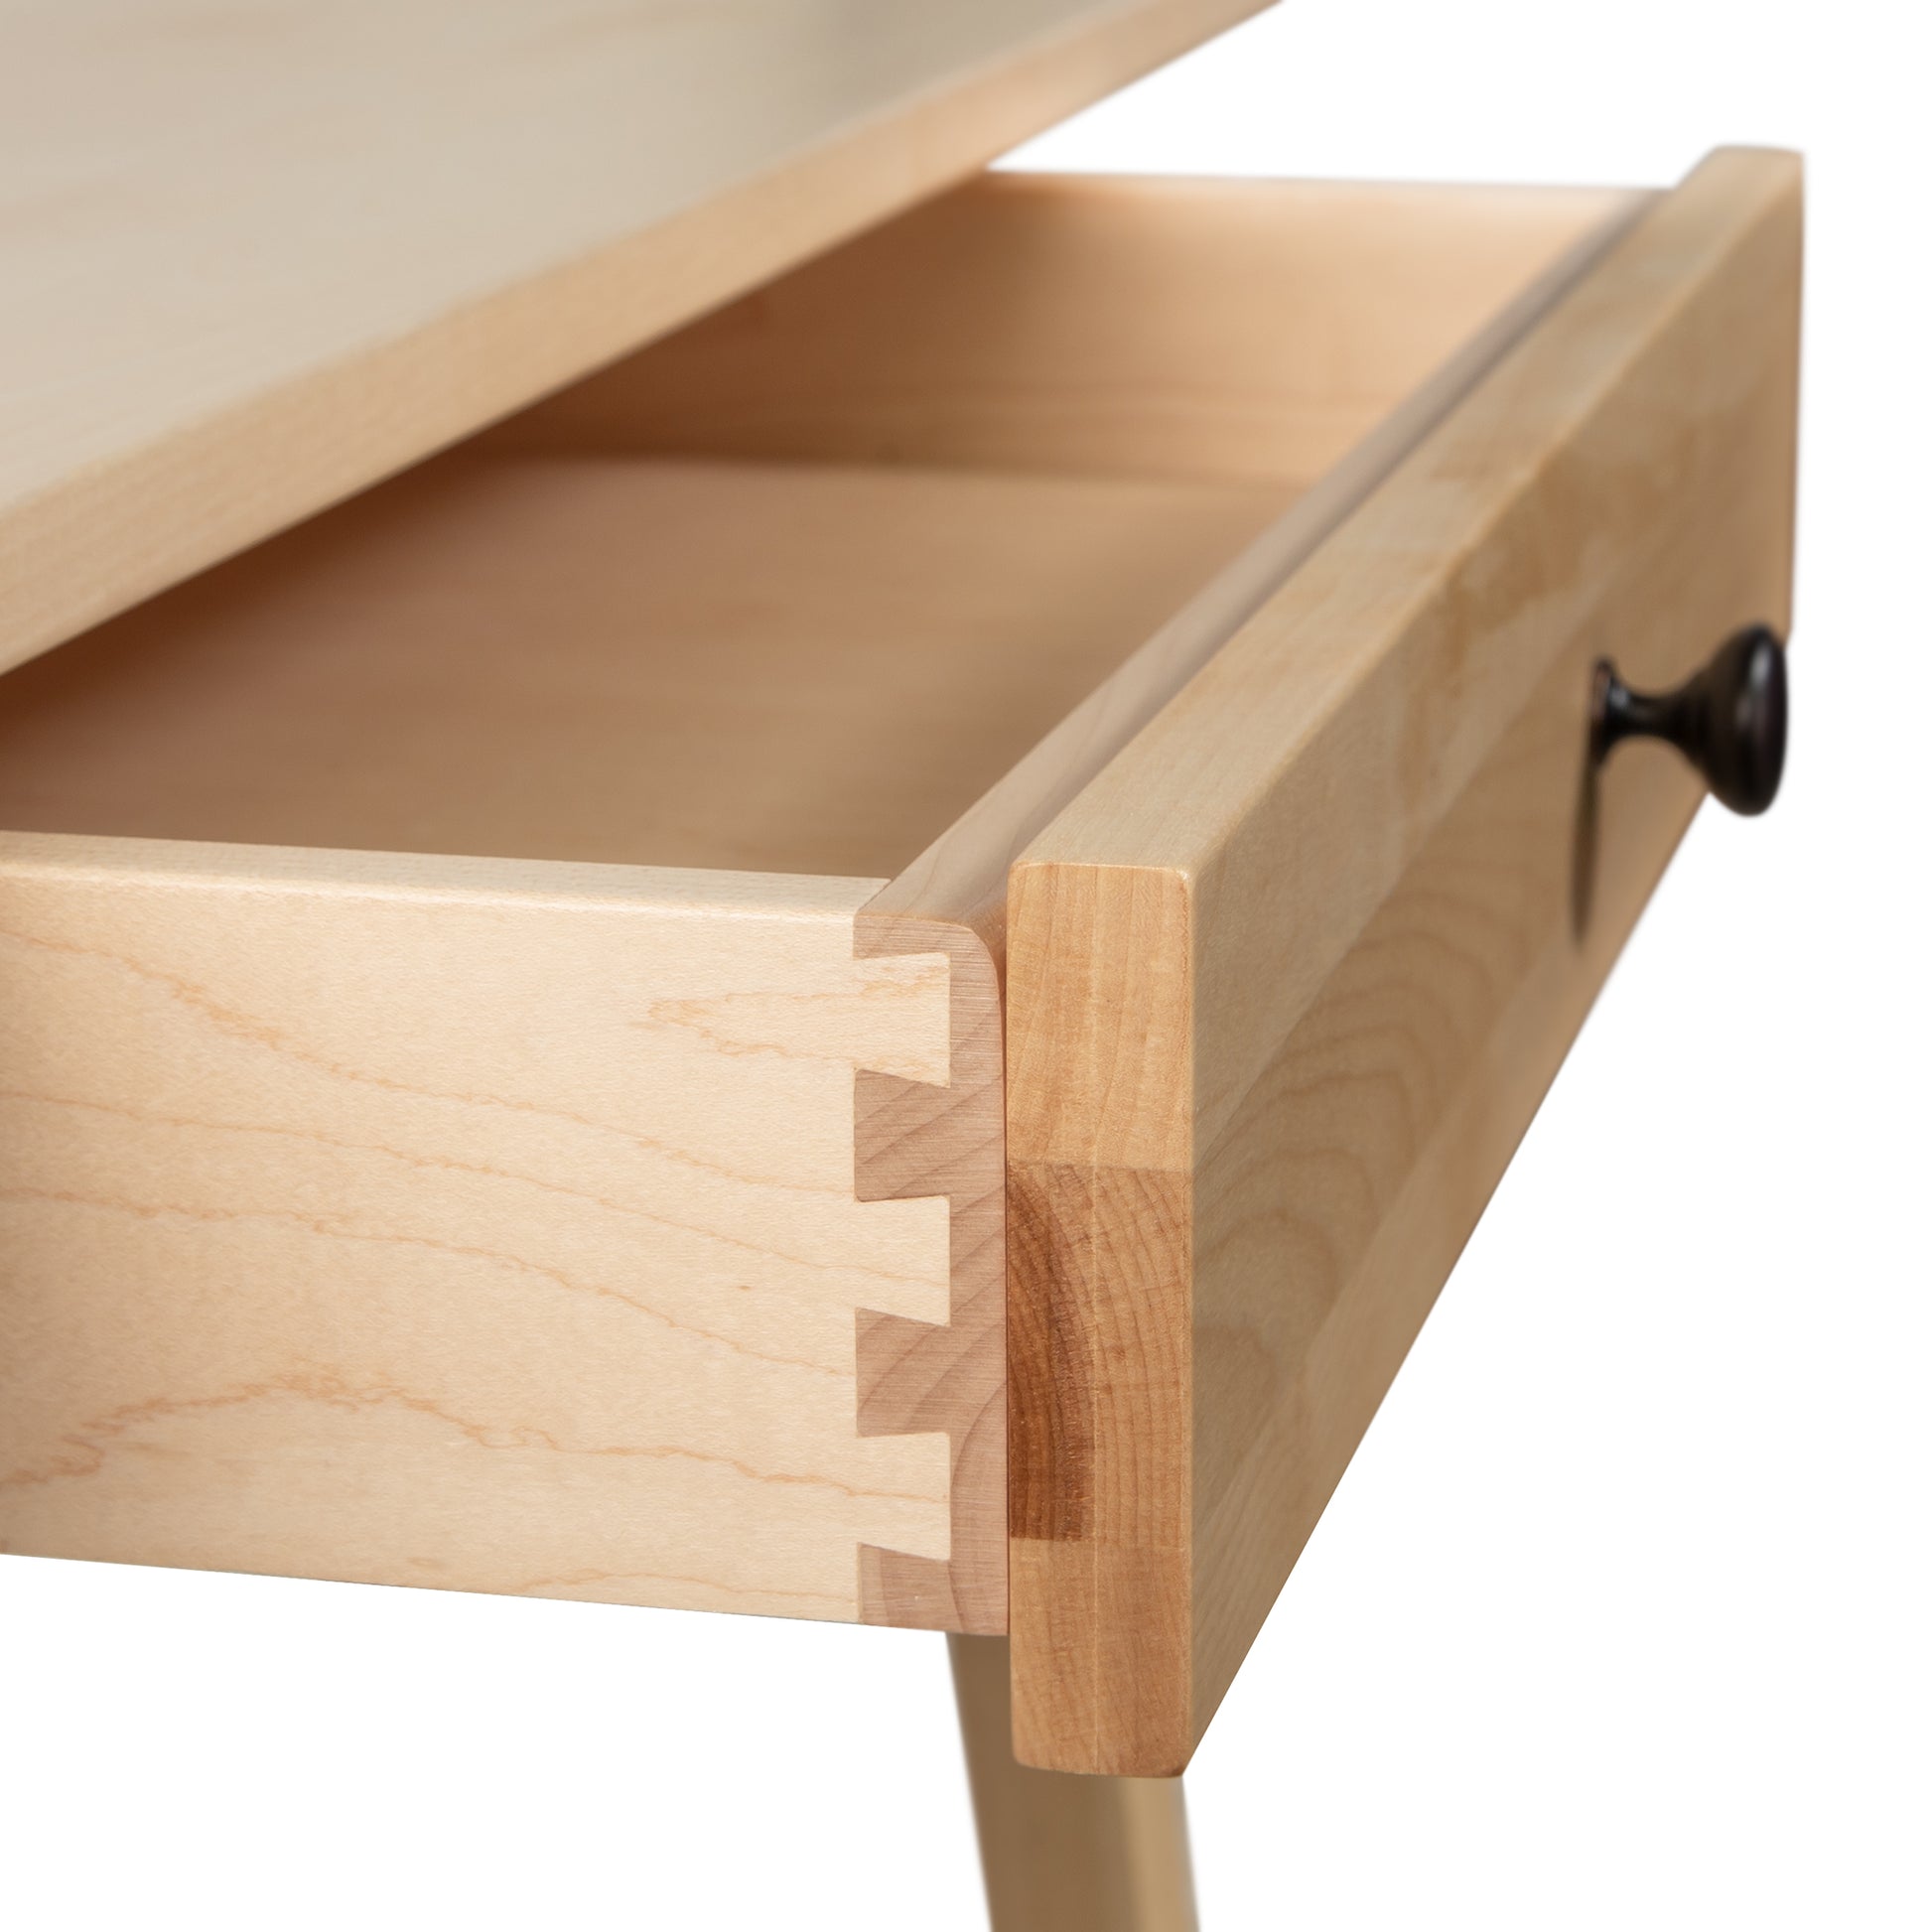 A close up of a wooden desk with a drawer.